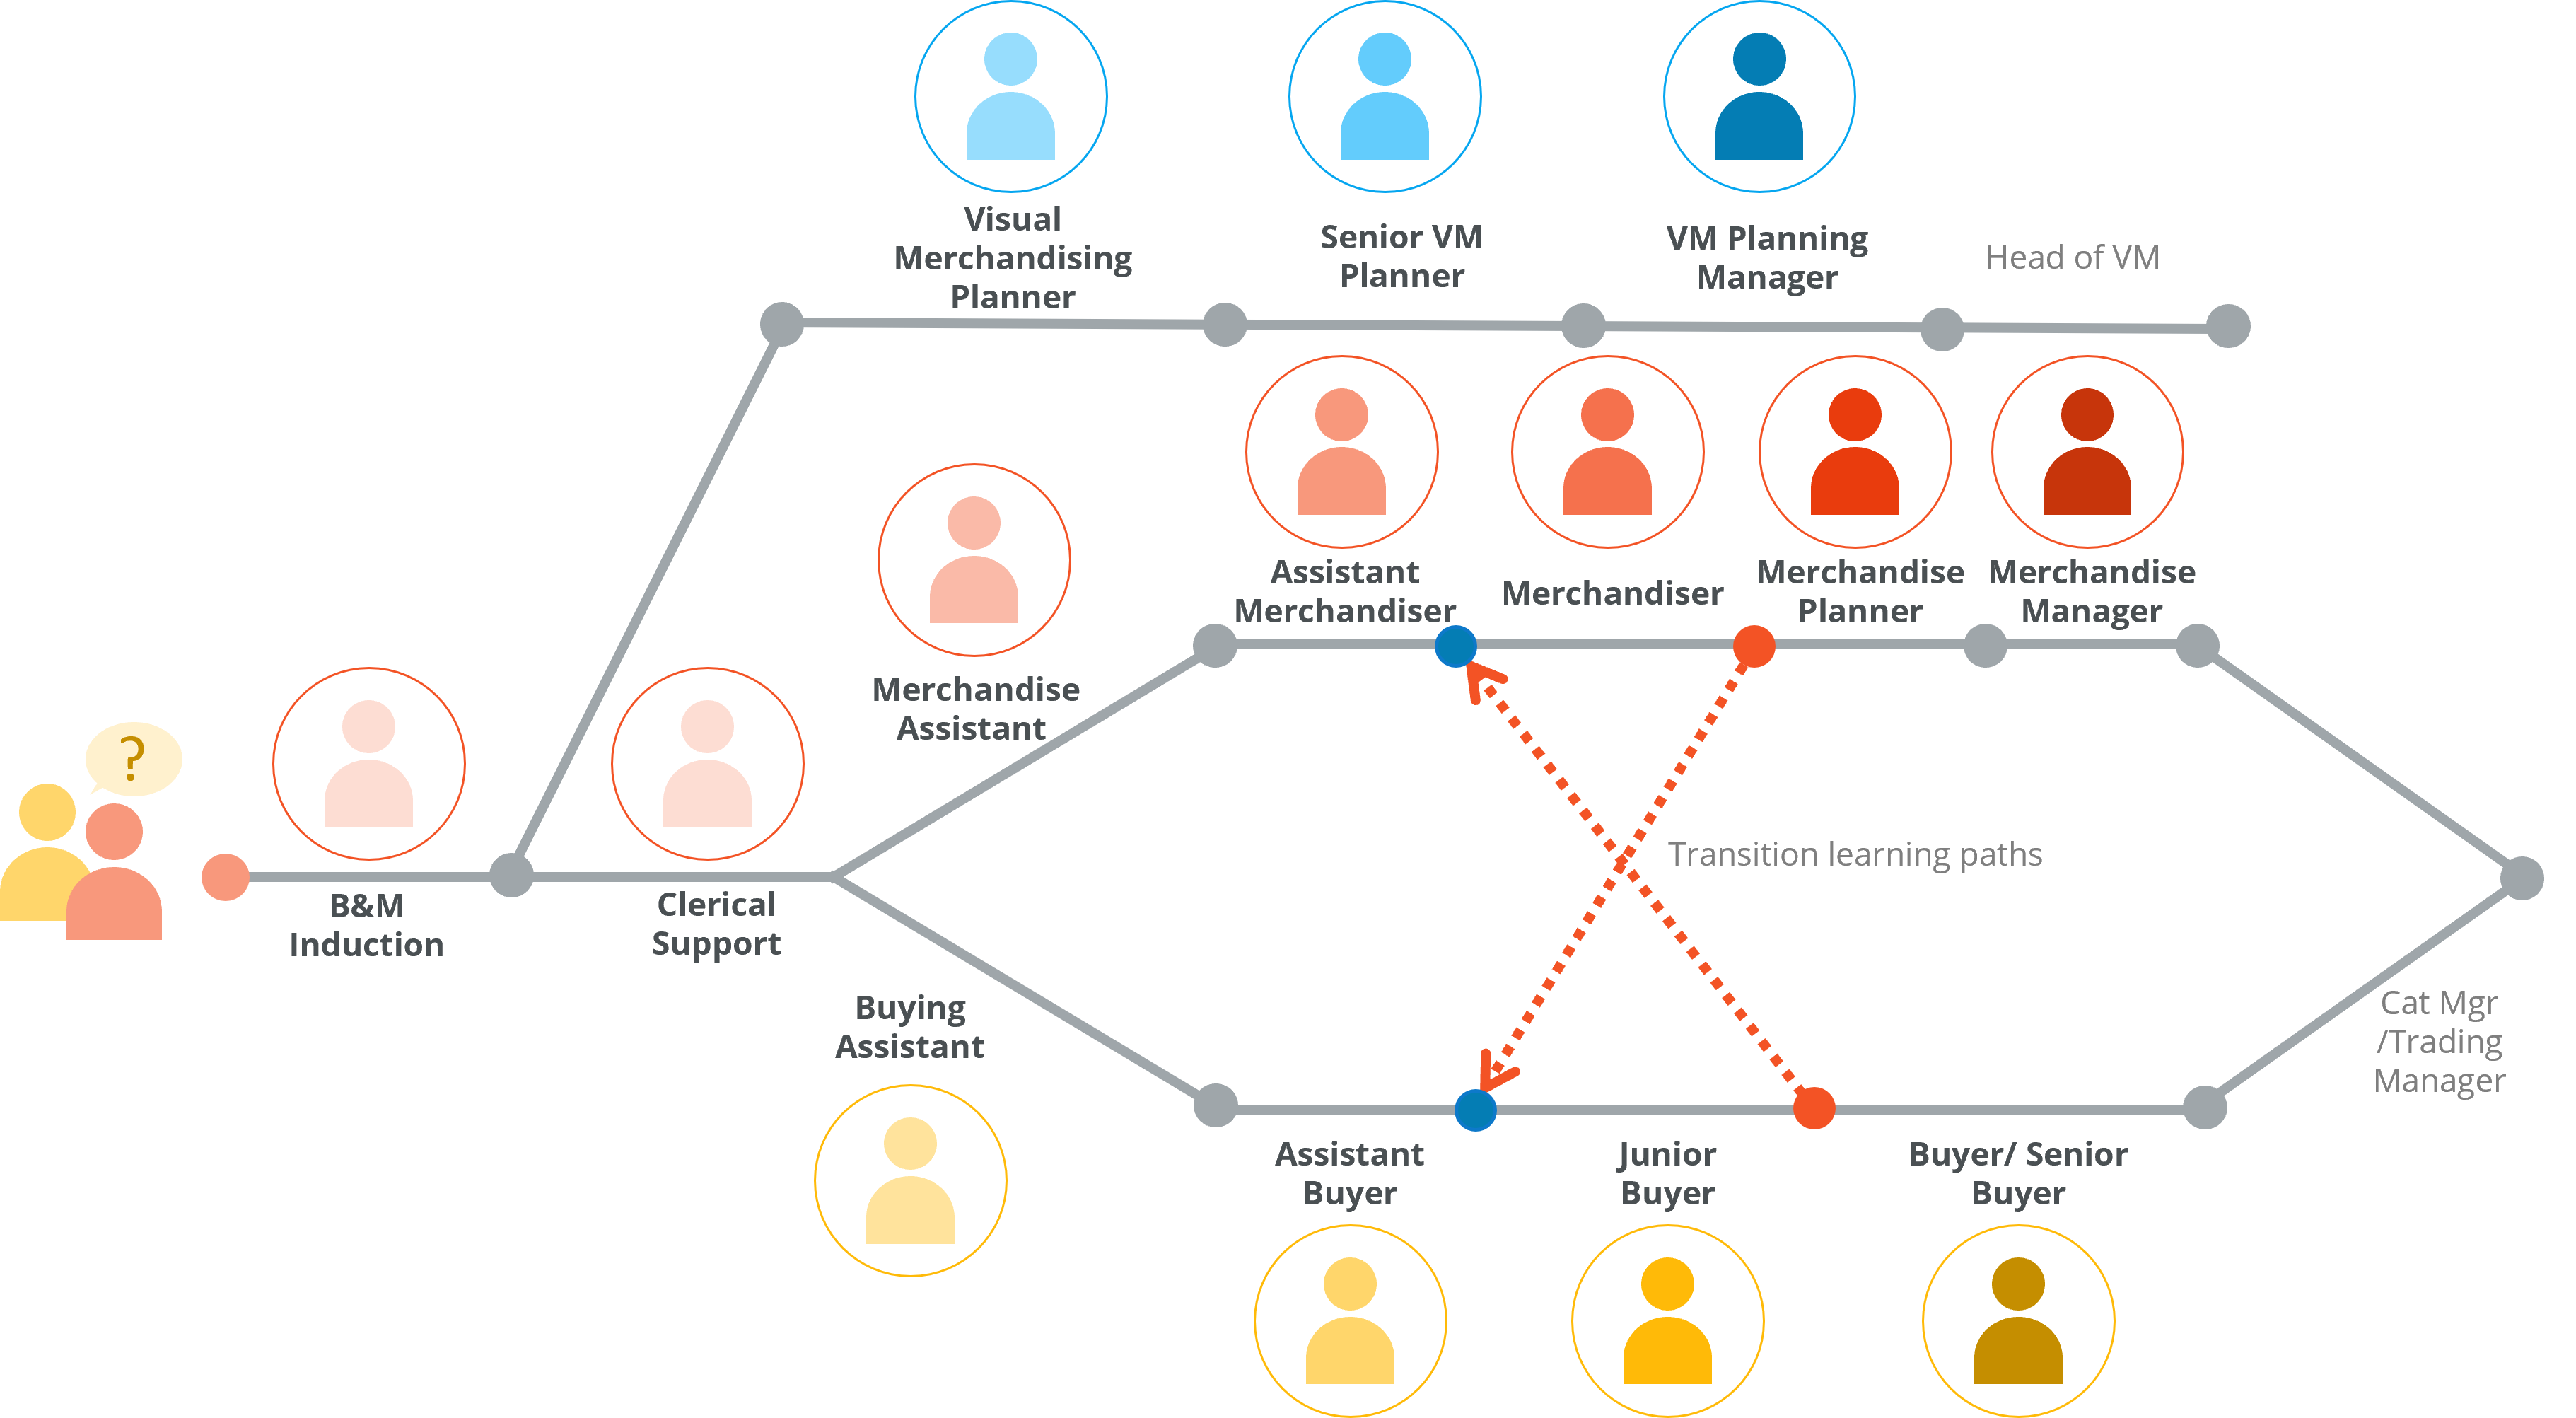 A career map showing the path options for a person within a retail organization who is currently in or about to take on a role in the Buying and Merchandising department.